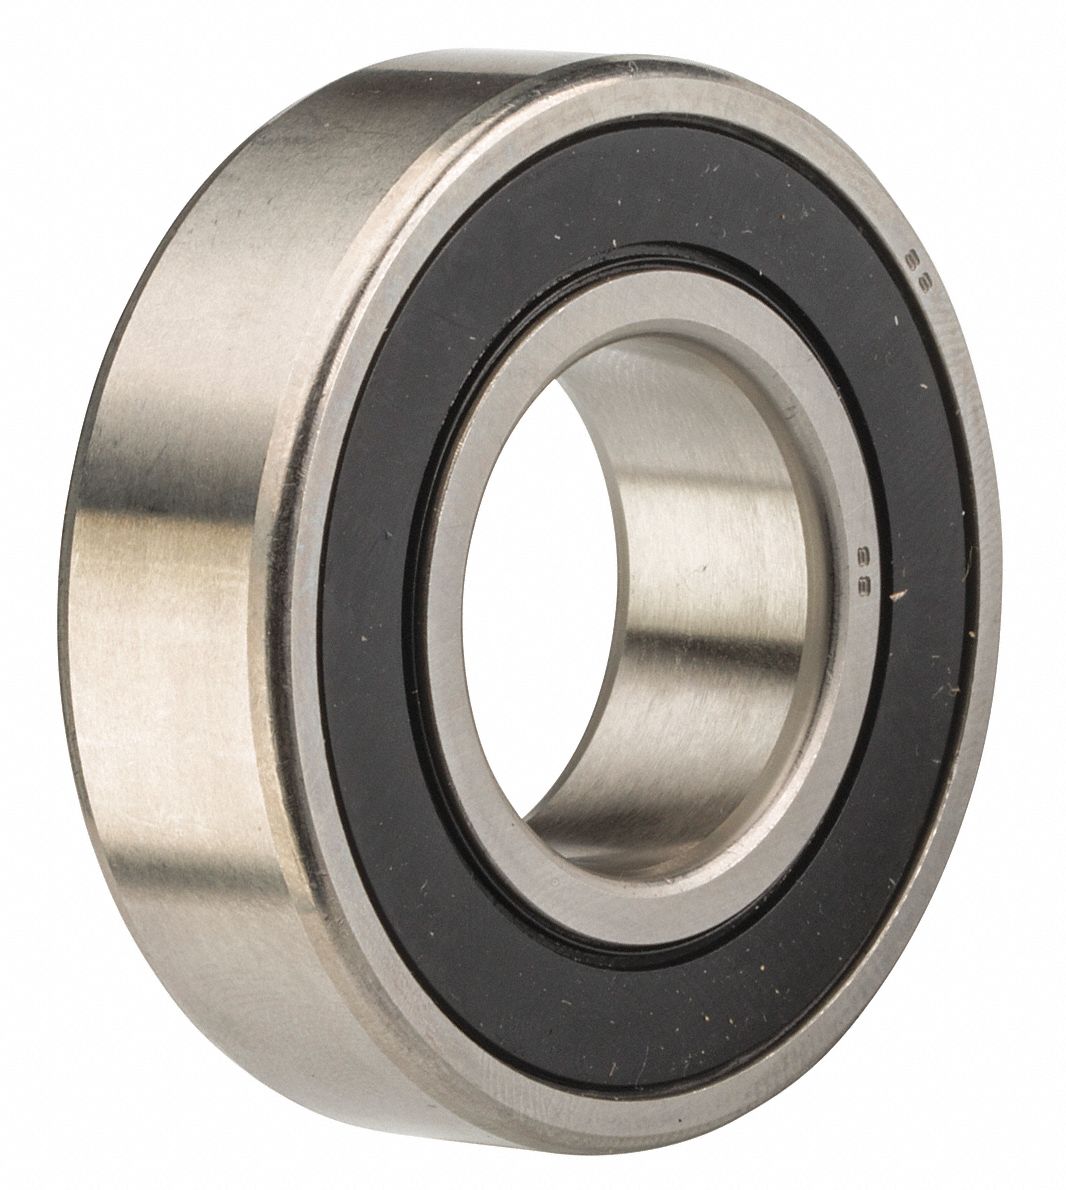 Radial Ball Bearing: 12 mm Bore Dia., 32 mm Outside Dia., 10 mm Wd, Double Sealed